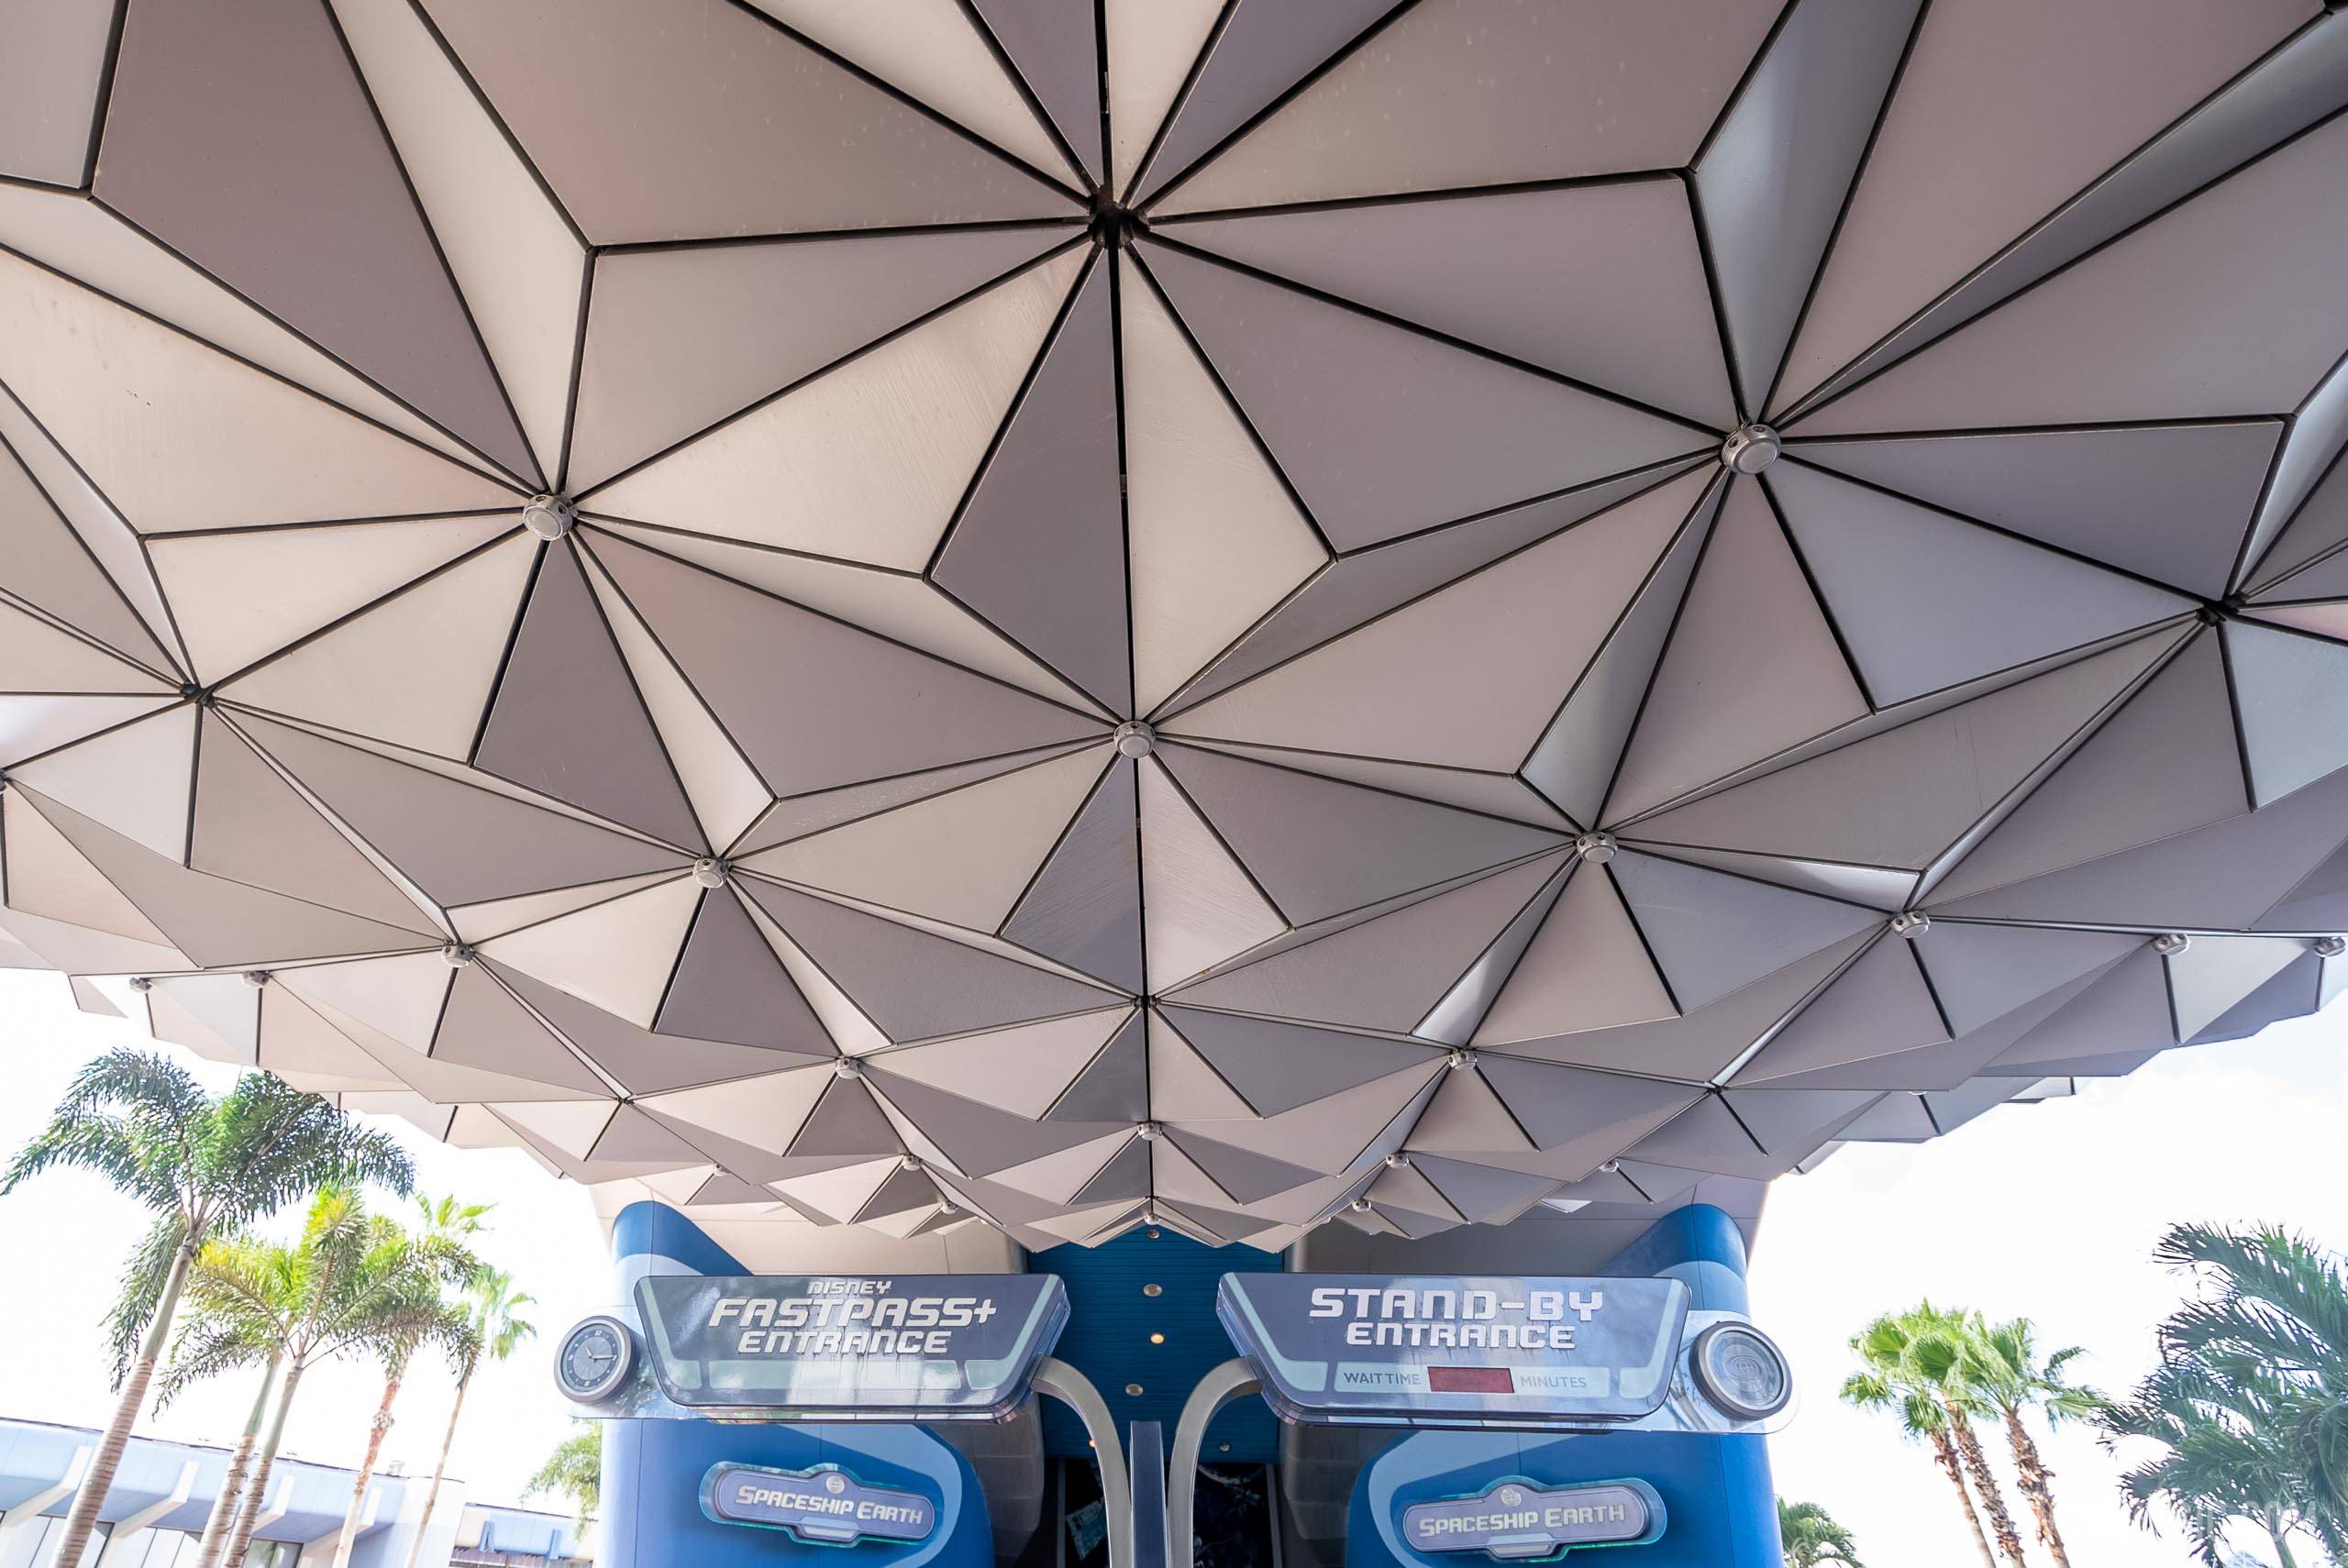 'Points of Light' in place on the underside of Spaceship Earth for EPCOT'S 'Beacons of Magic' show